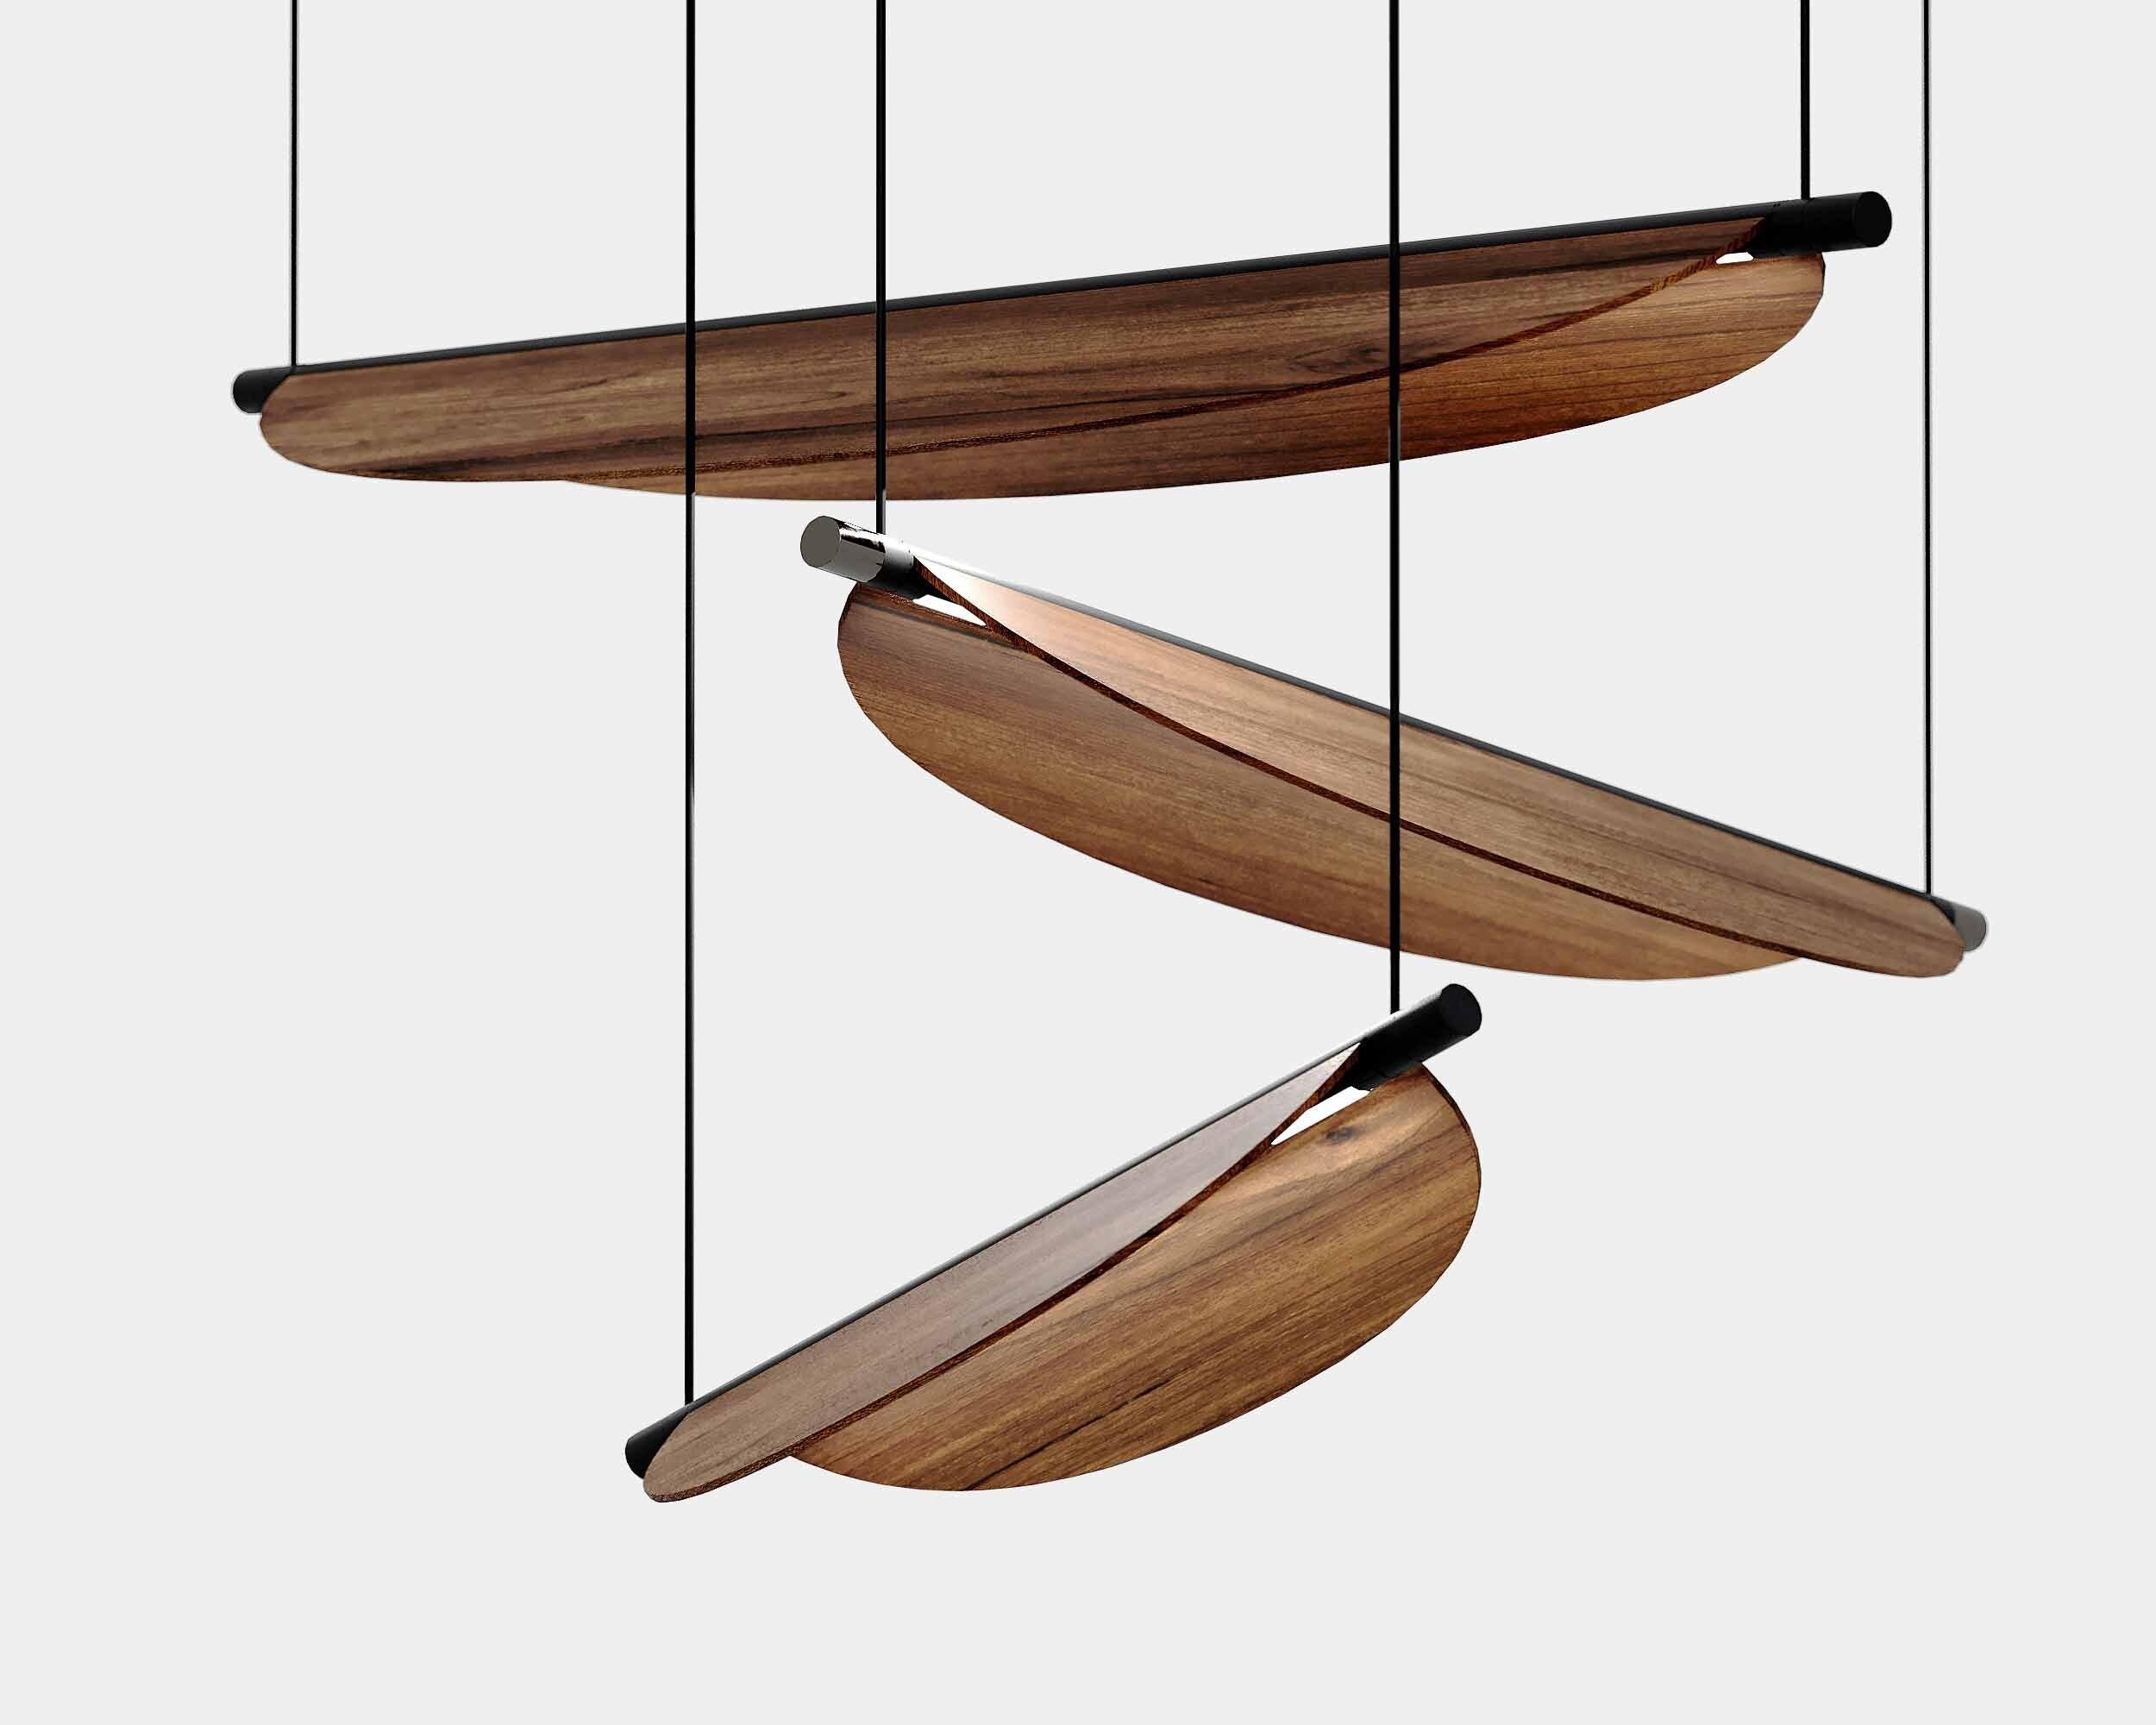 Thula 562.22 by Frederica Biasi x Tooy
Pendant Lamp 
Compliant with US electric system

Model sold: 
- hardware sand black 
- details in satin nickel
- shade in walnut canaletto

Materials: aluminum, metal, wood

The Thula suspension lamps are based